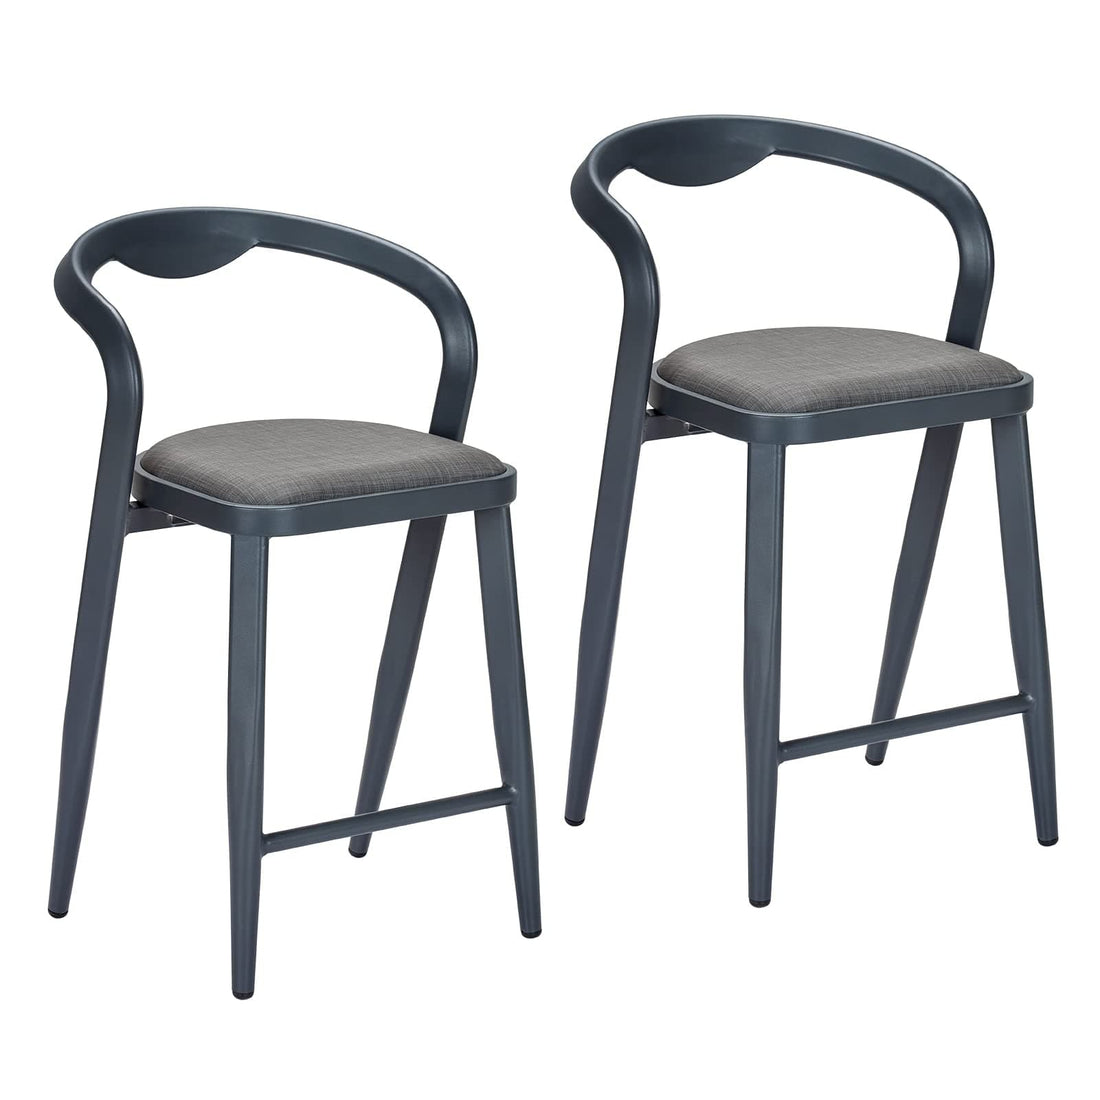 Counter Height Bar Stools Set of 2, Stylish Modern High Bar Stools, Comfortable Indoor and Outdoor Bar Chairs for Patio Garden Balcony Poolside